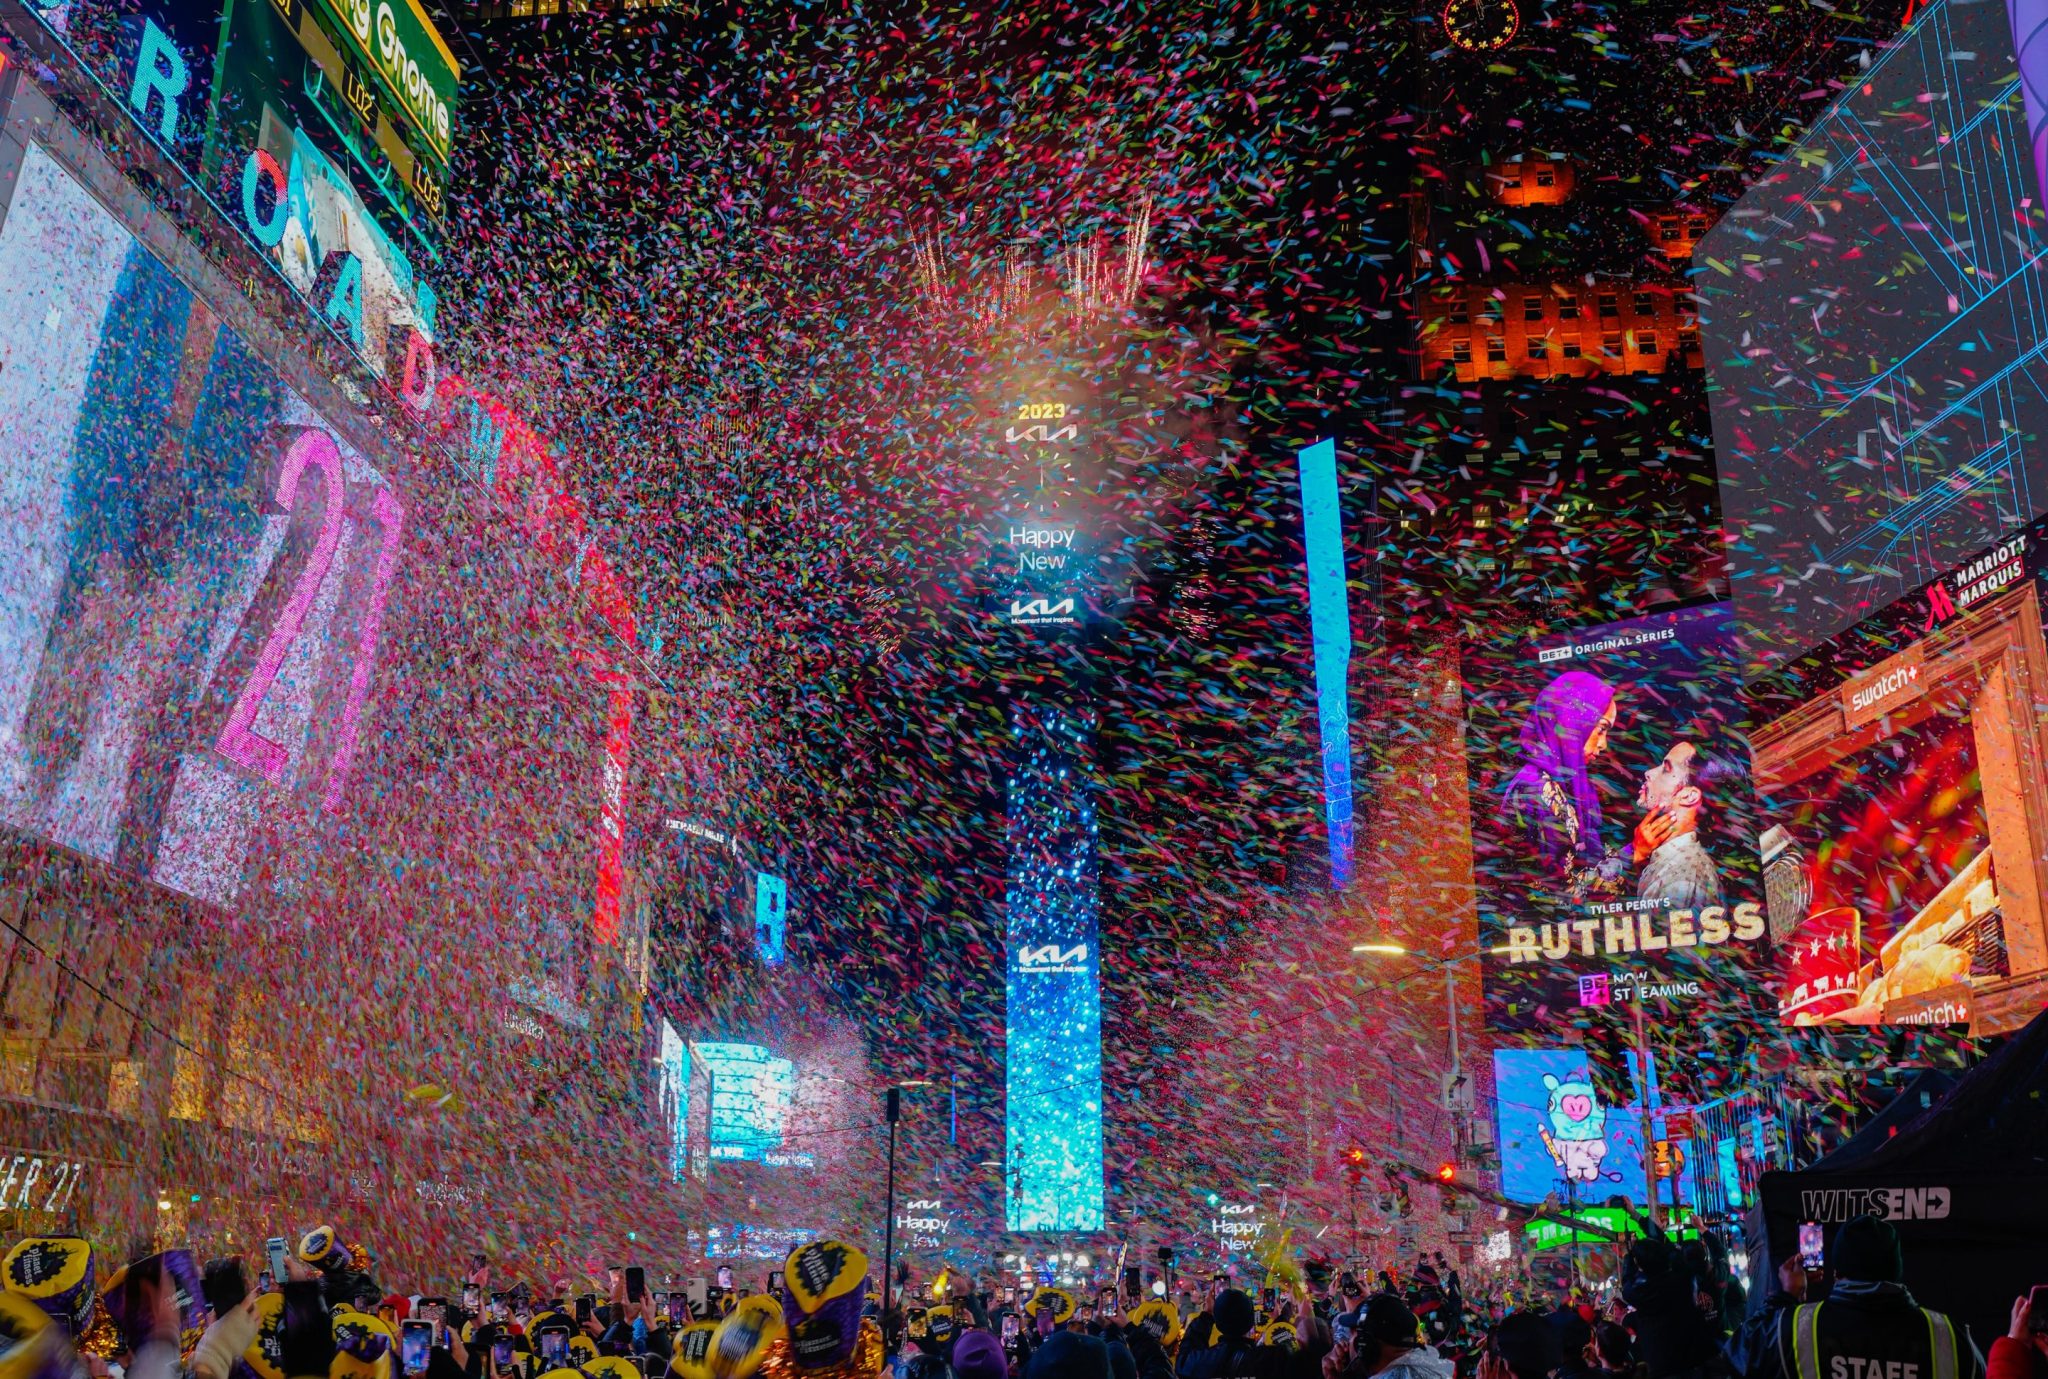 How to watch, stream ball drop in Times Square live online free without cable: Fox, NBC, ABC, CNN